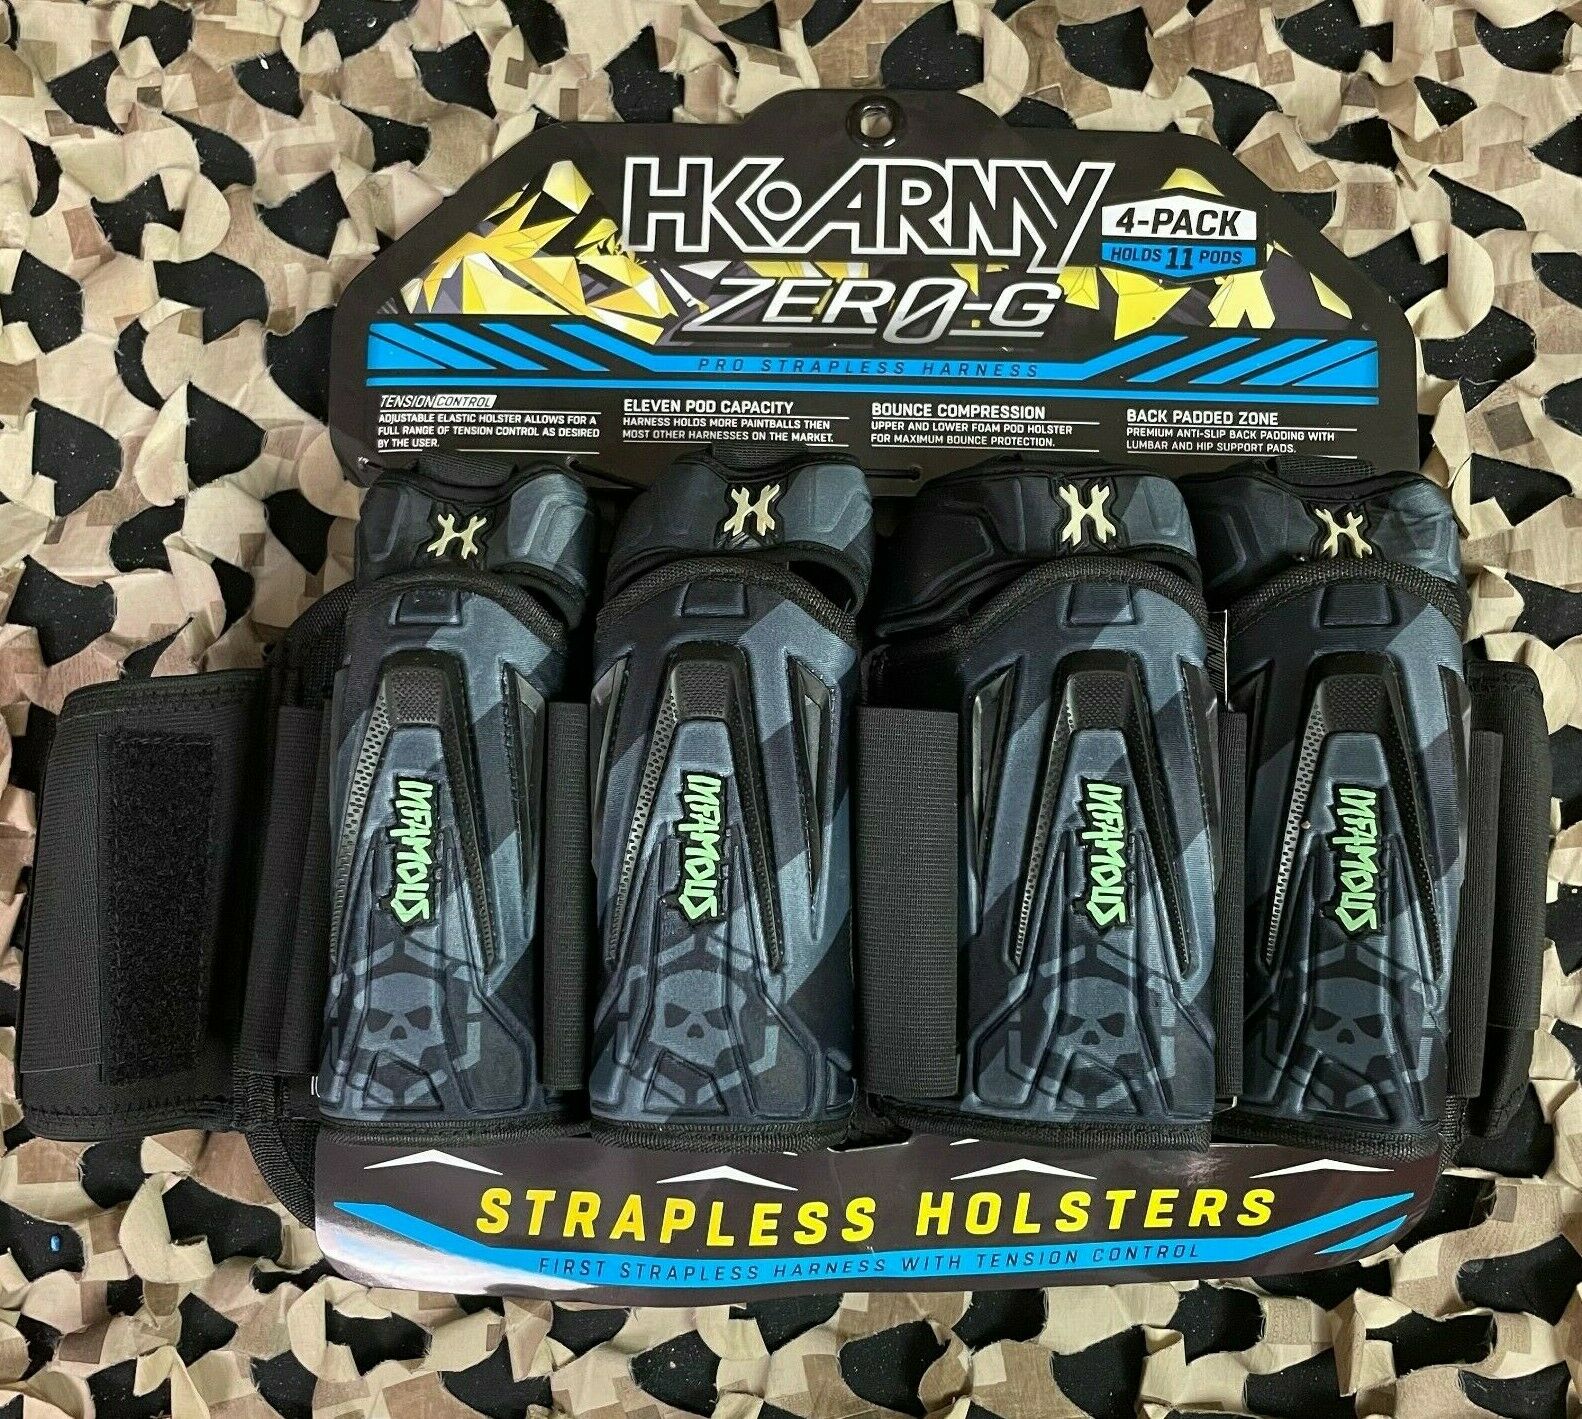 New Hk Army Zero-g 4+3+4 Paintball Harness - Infamous